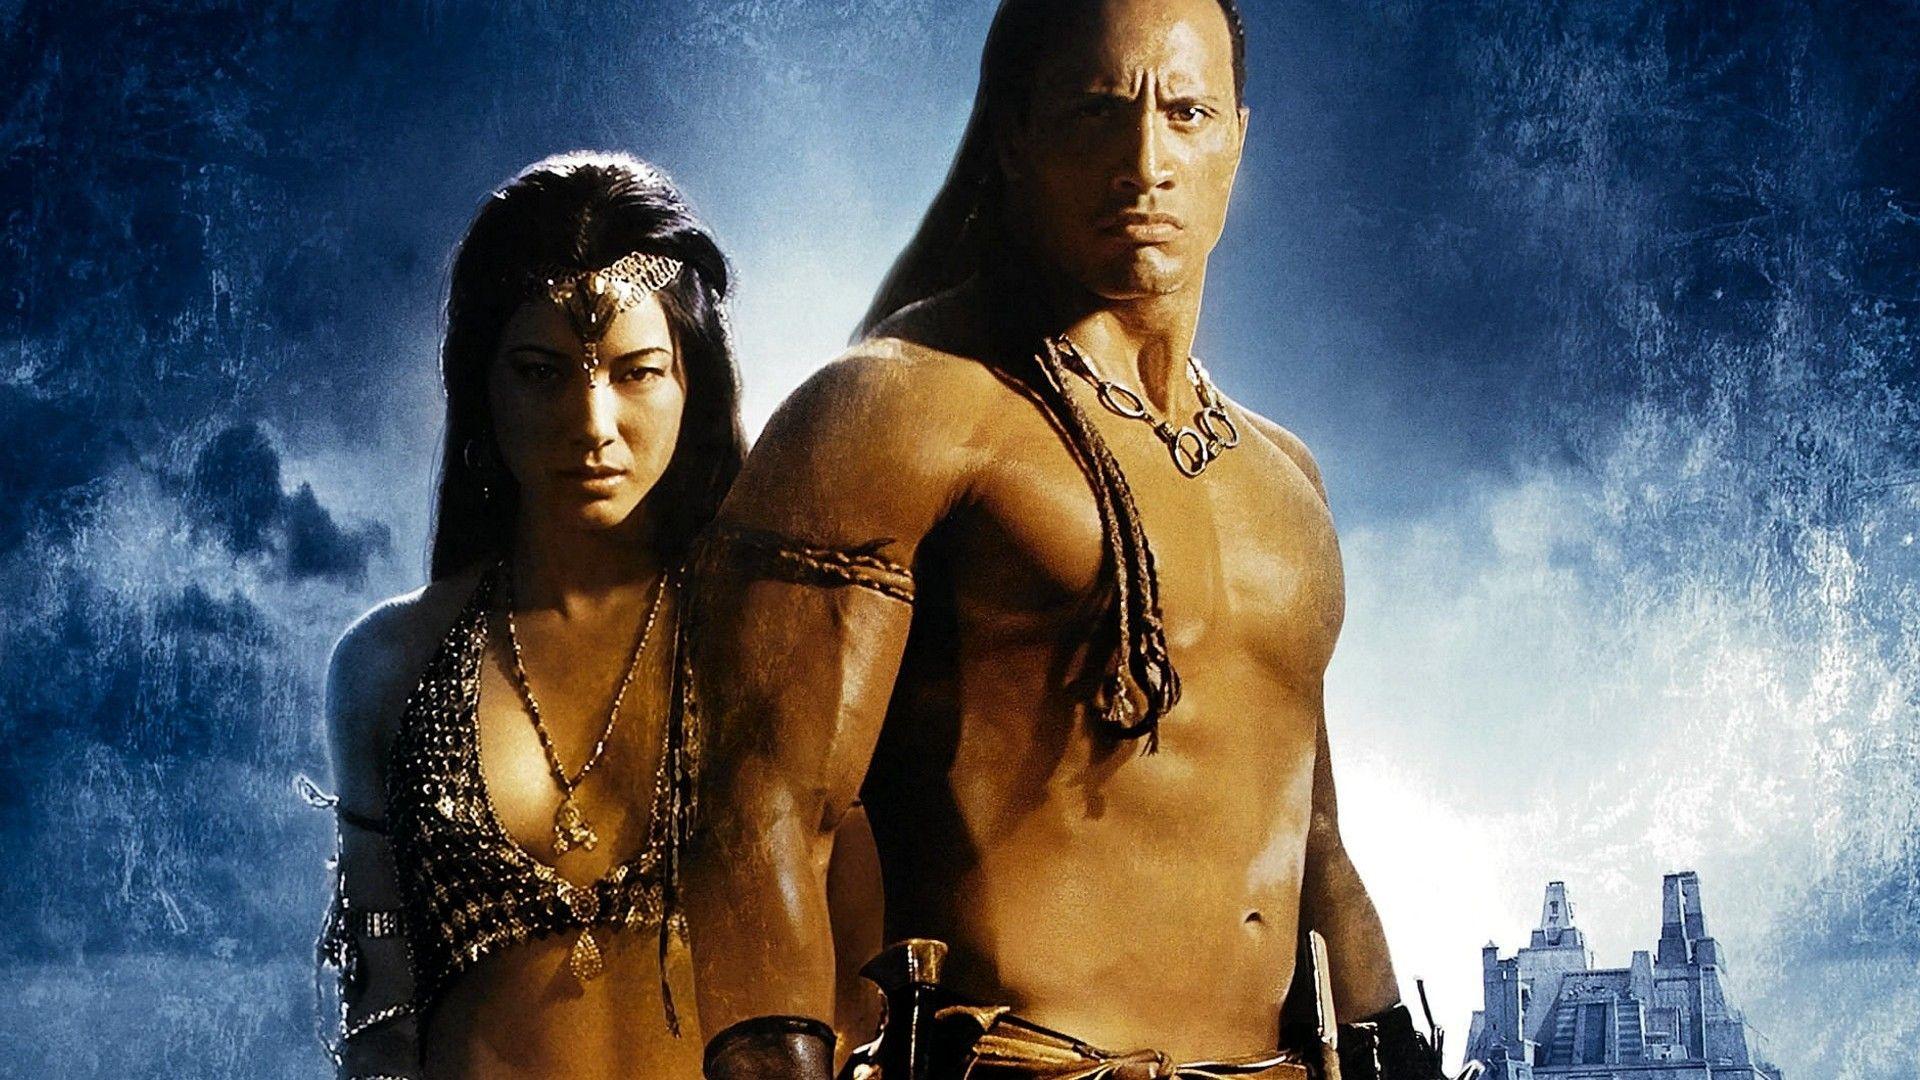 The Scorpion King Full HD Wallpaper and Background Imagex1080